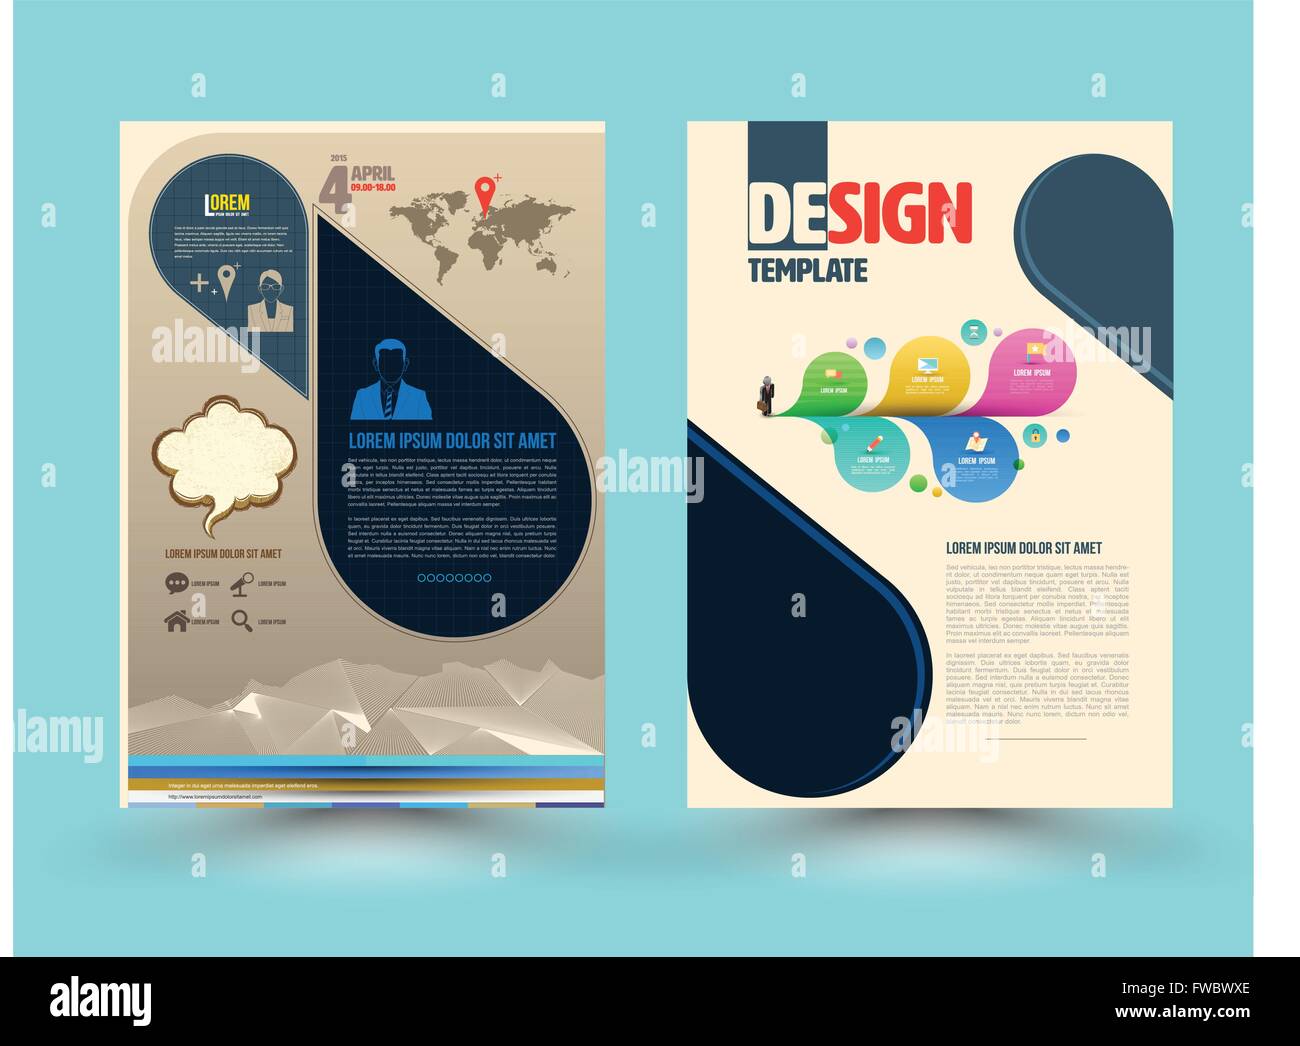 Vector brochure template design. Business graphics brochures. Used for cover layout, infographics, brochures, flyers and prints. Stock Vector